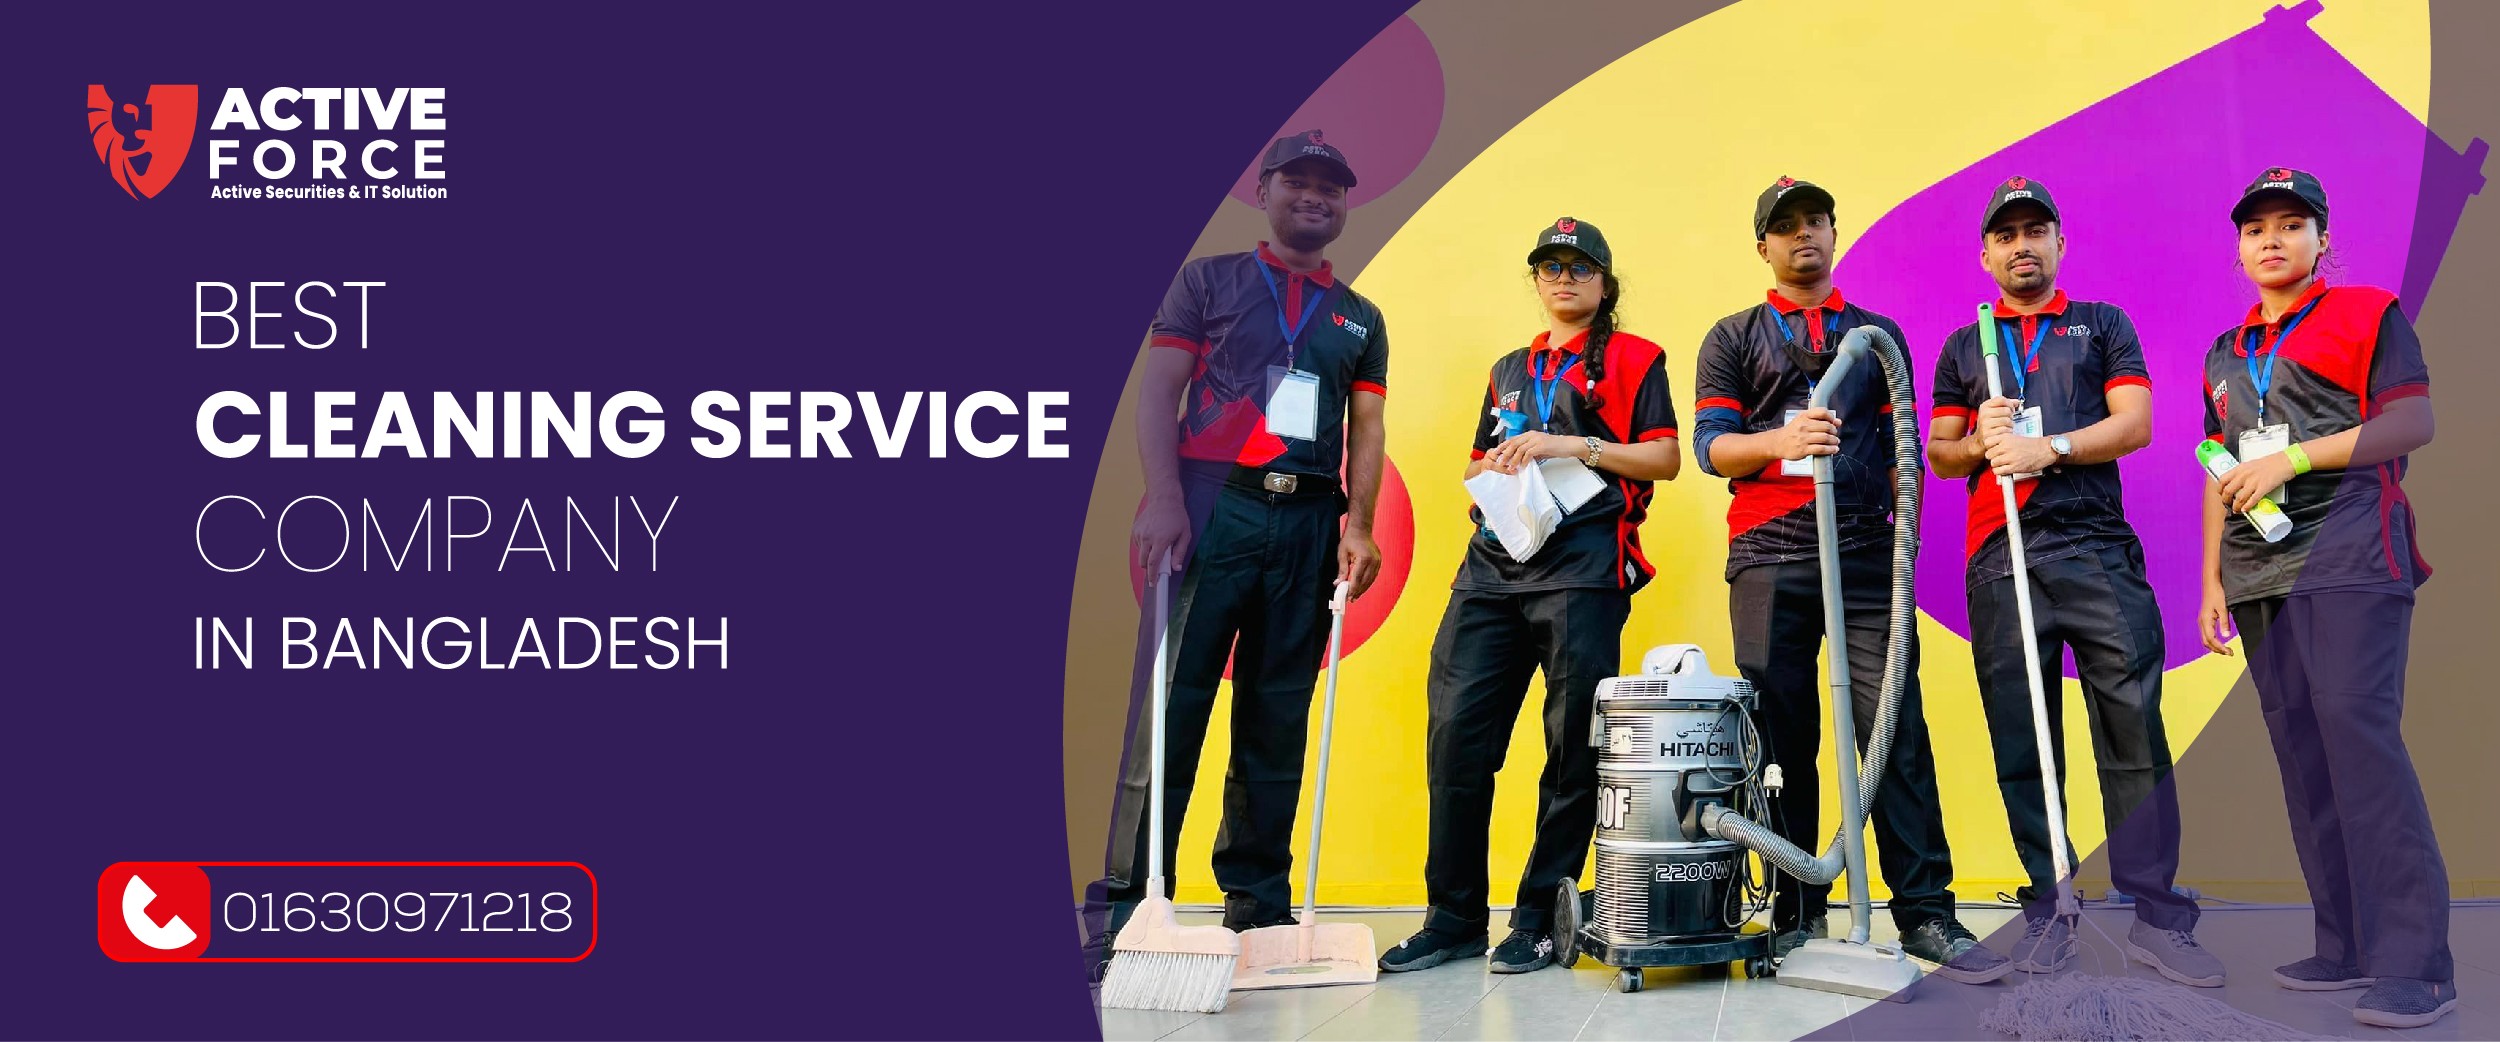 Best Cleaning Service Company in Bangladesh | Active Force